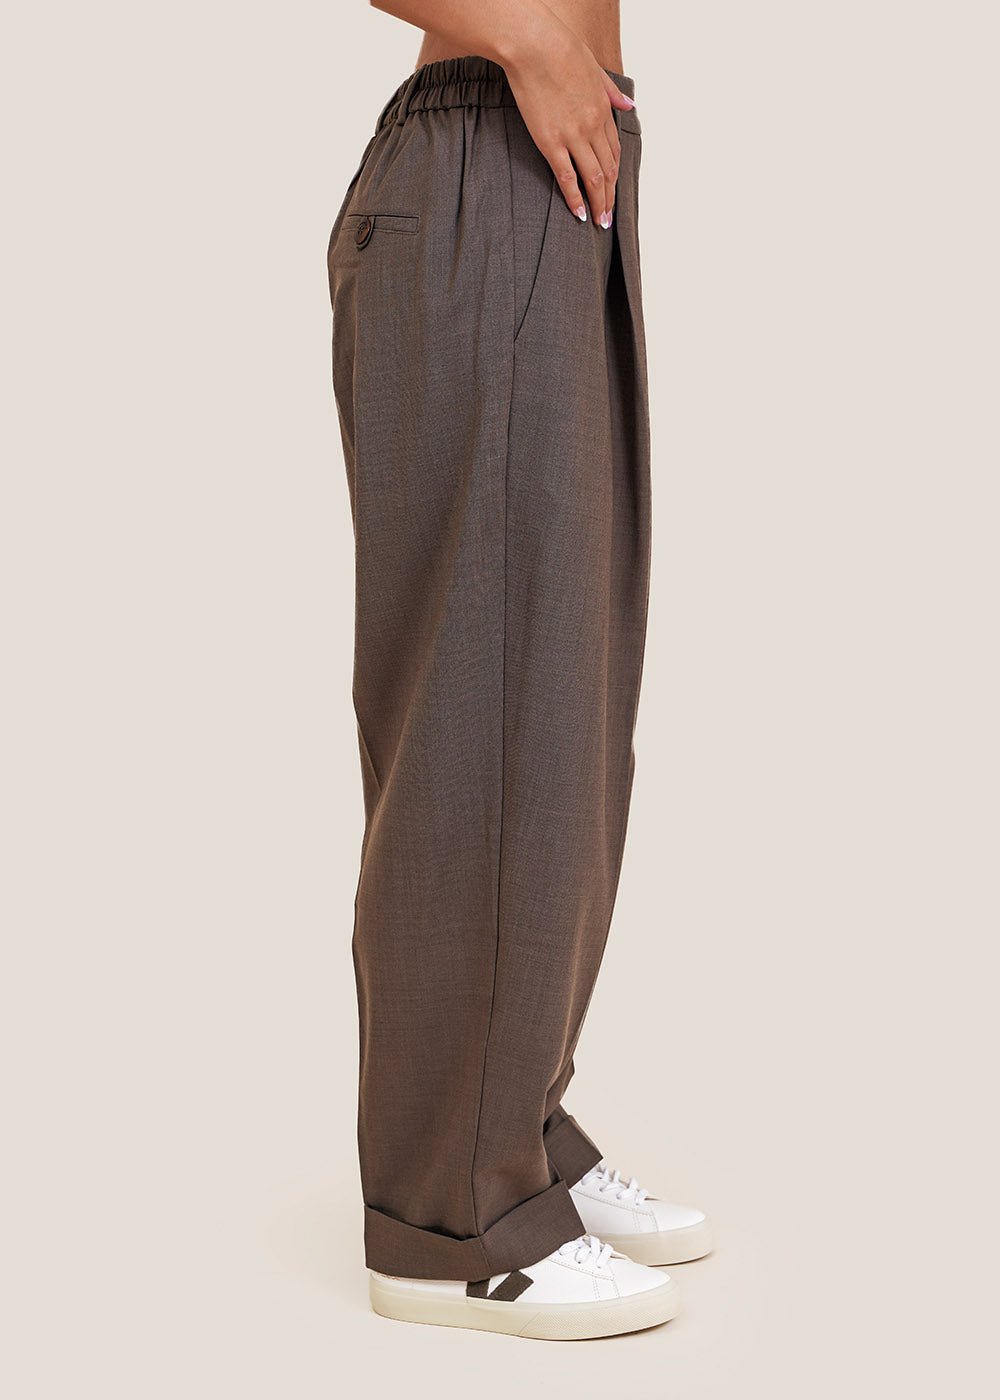 Cordera Vetiver Tailored Masculine Pants - New Classics Studios Sustainable Ethical Fashion Canada